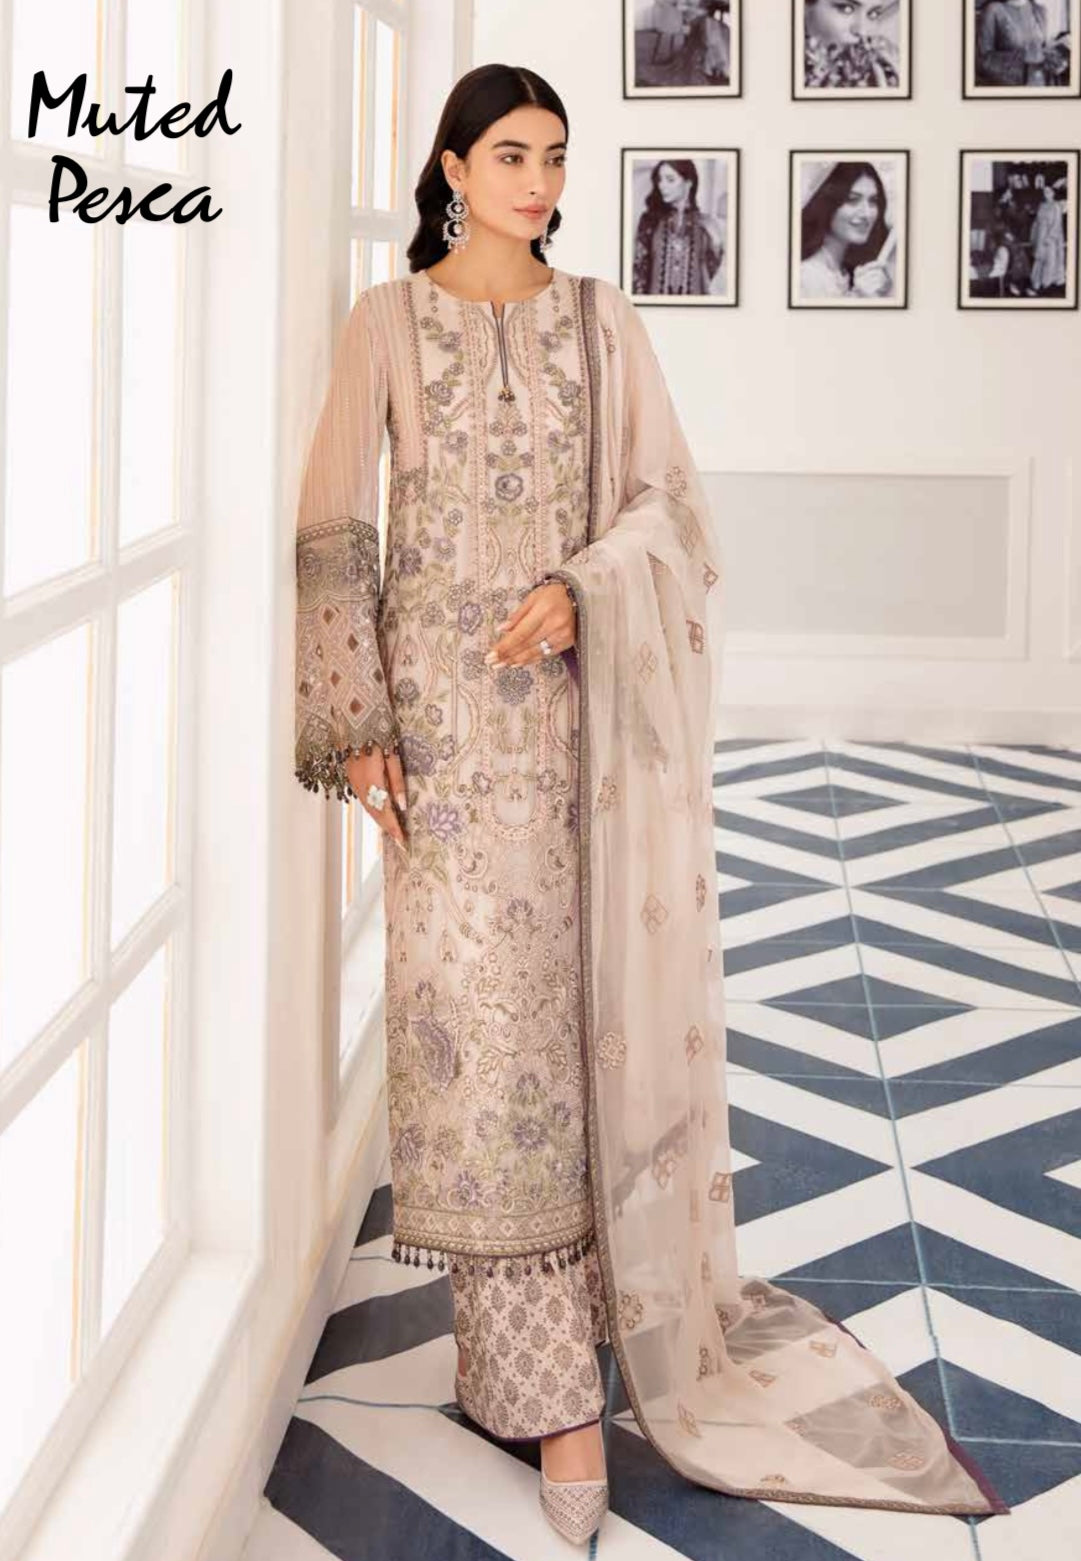 SIMRANS Safeera chiffon muted pesca pink coloured suit